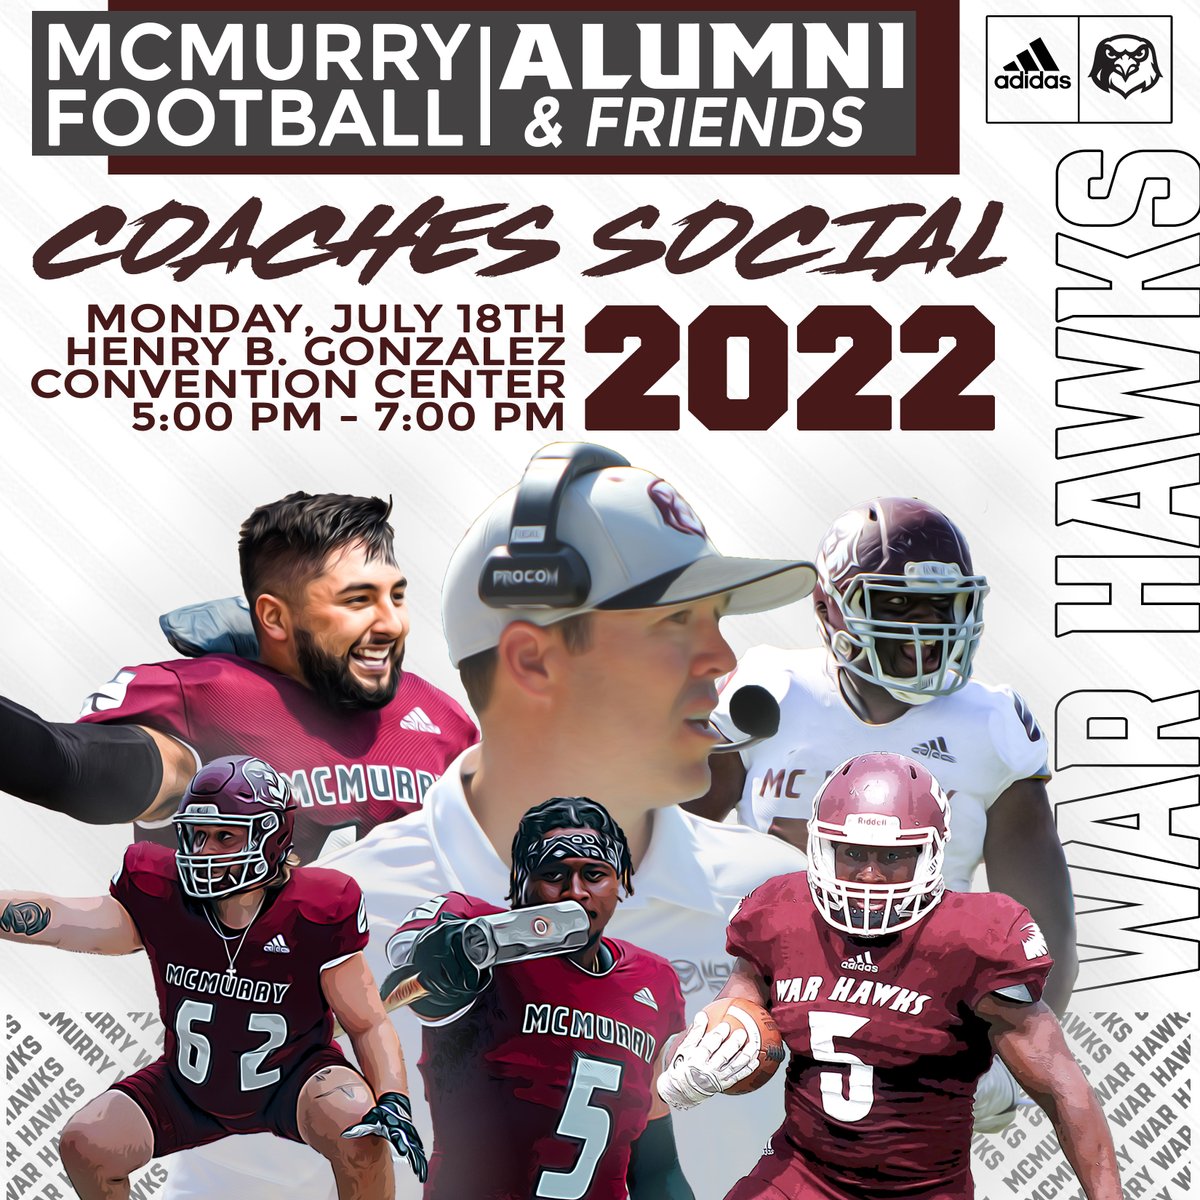 Join us later TODAY for the McMurry Football Alumni & Friends Coaches Social in the Henry B. Gonzalez Convention Center Room #205! See you all soon! #WarHawksFAW #AlaCumba